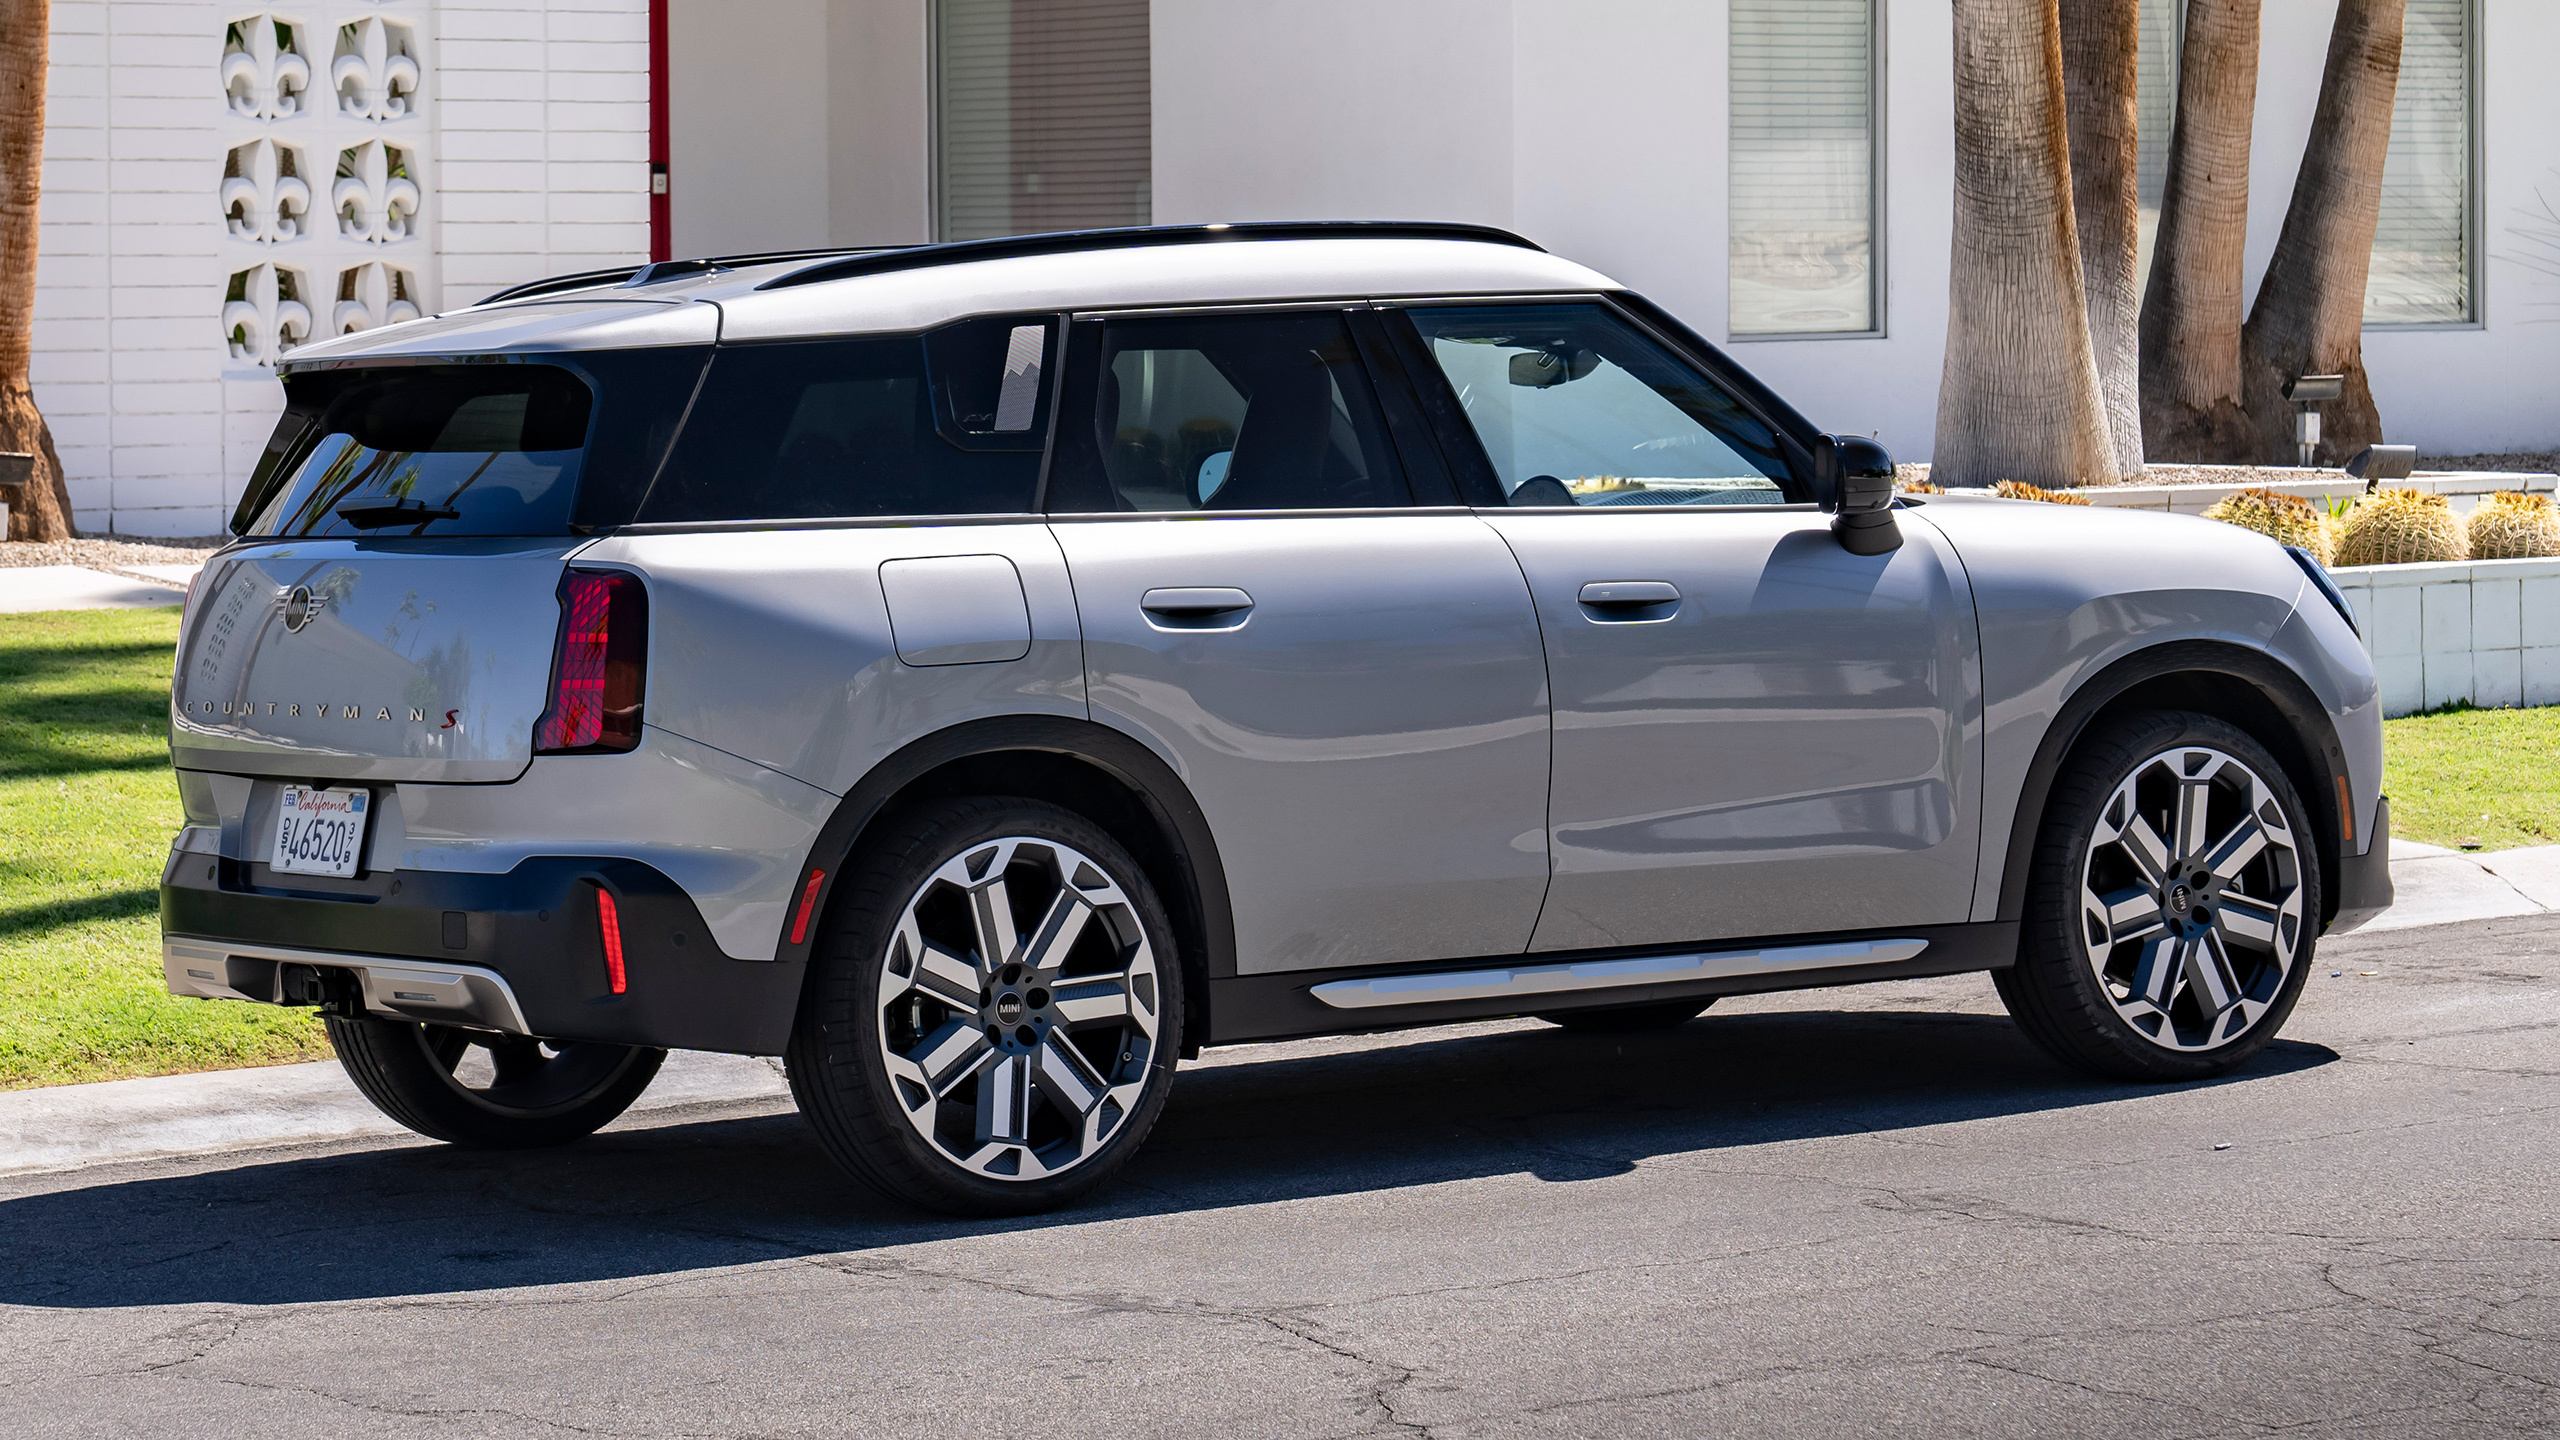 2025 Mini Countryman Kicks Off From $38,900 In The U.S. With 241 HP S ALL4